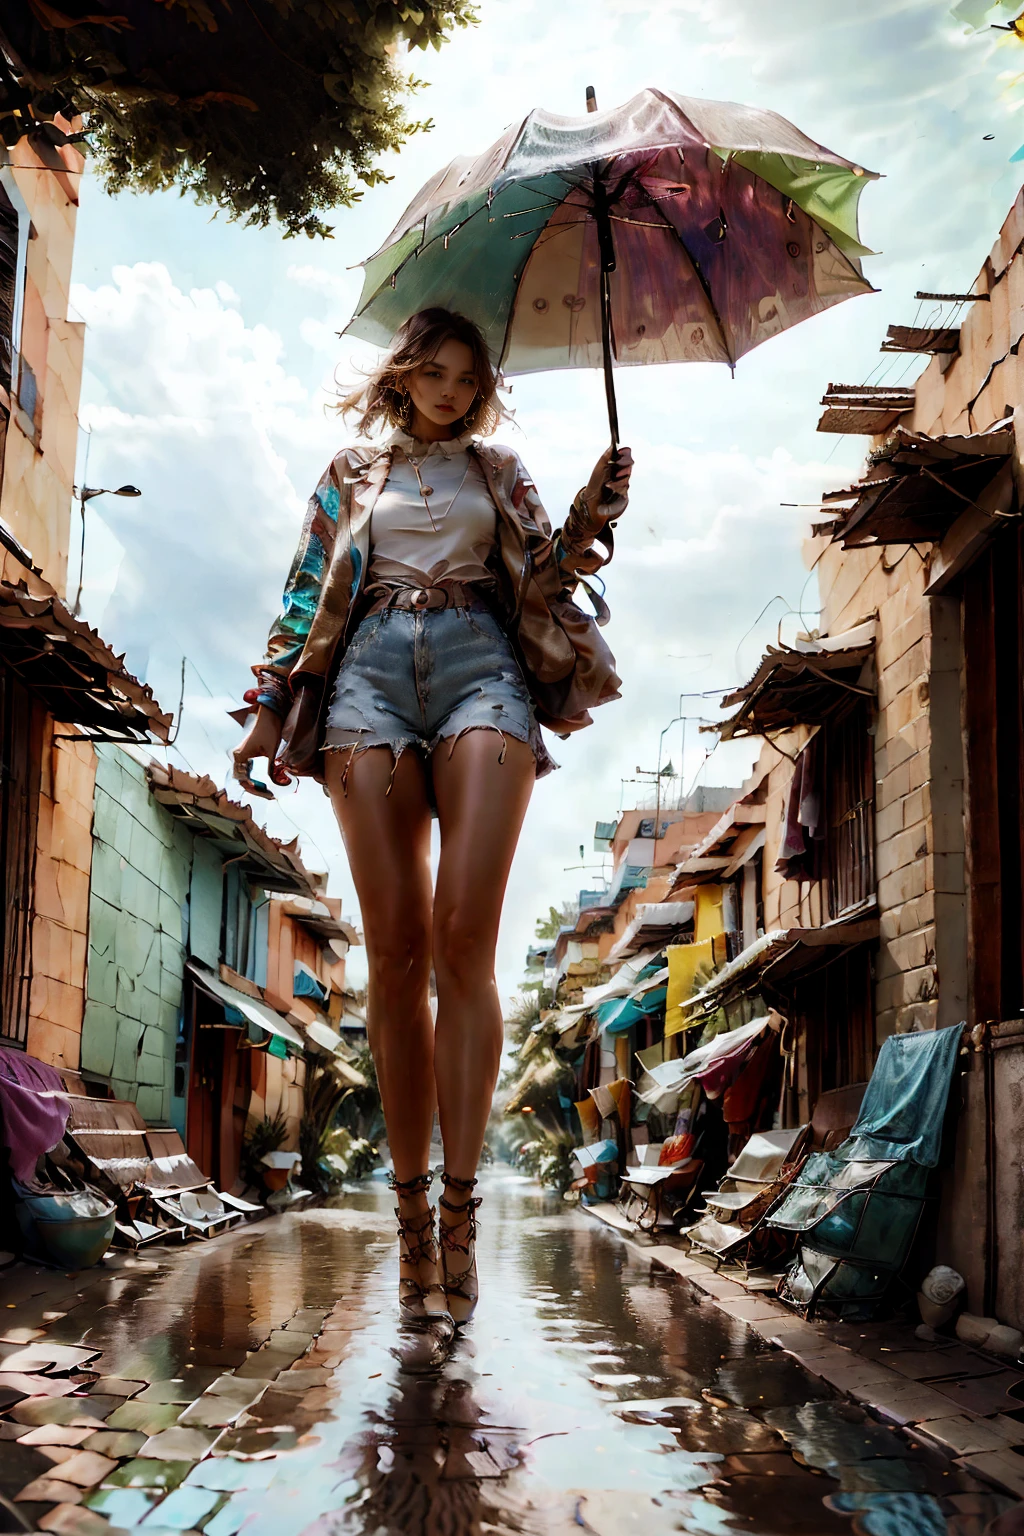 a young woman walking with an umbrella on a rainy and colorful street in la boca, buenos aires, argentina, detailed city scene, rainy day, puddles on the ground, vibrant colors, 4k, photorealistic, high quality, masterpiece